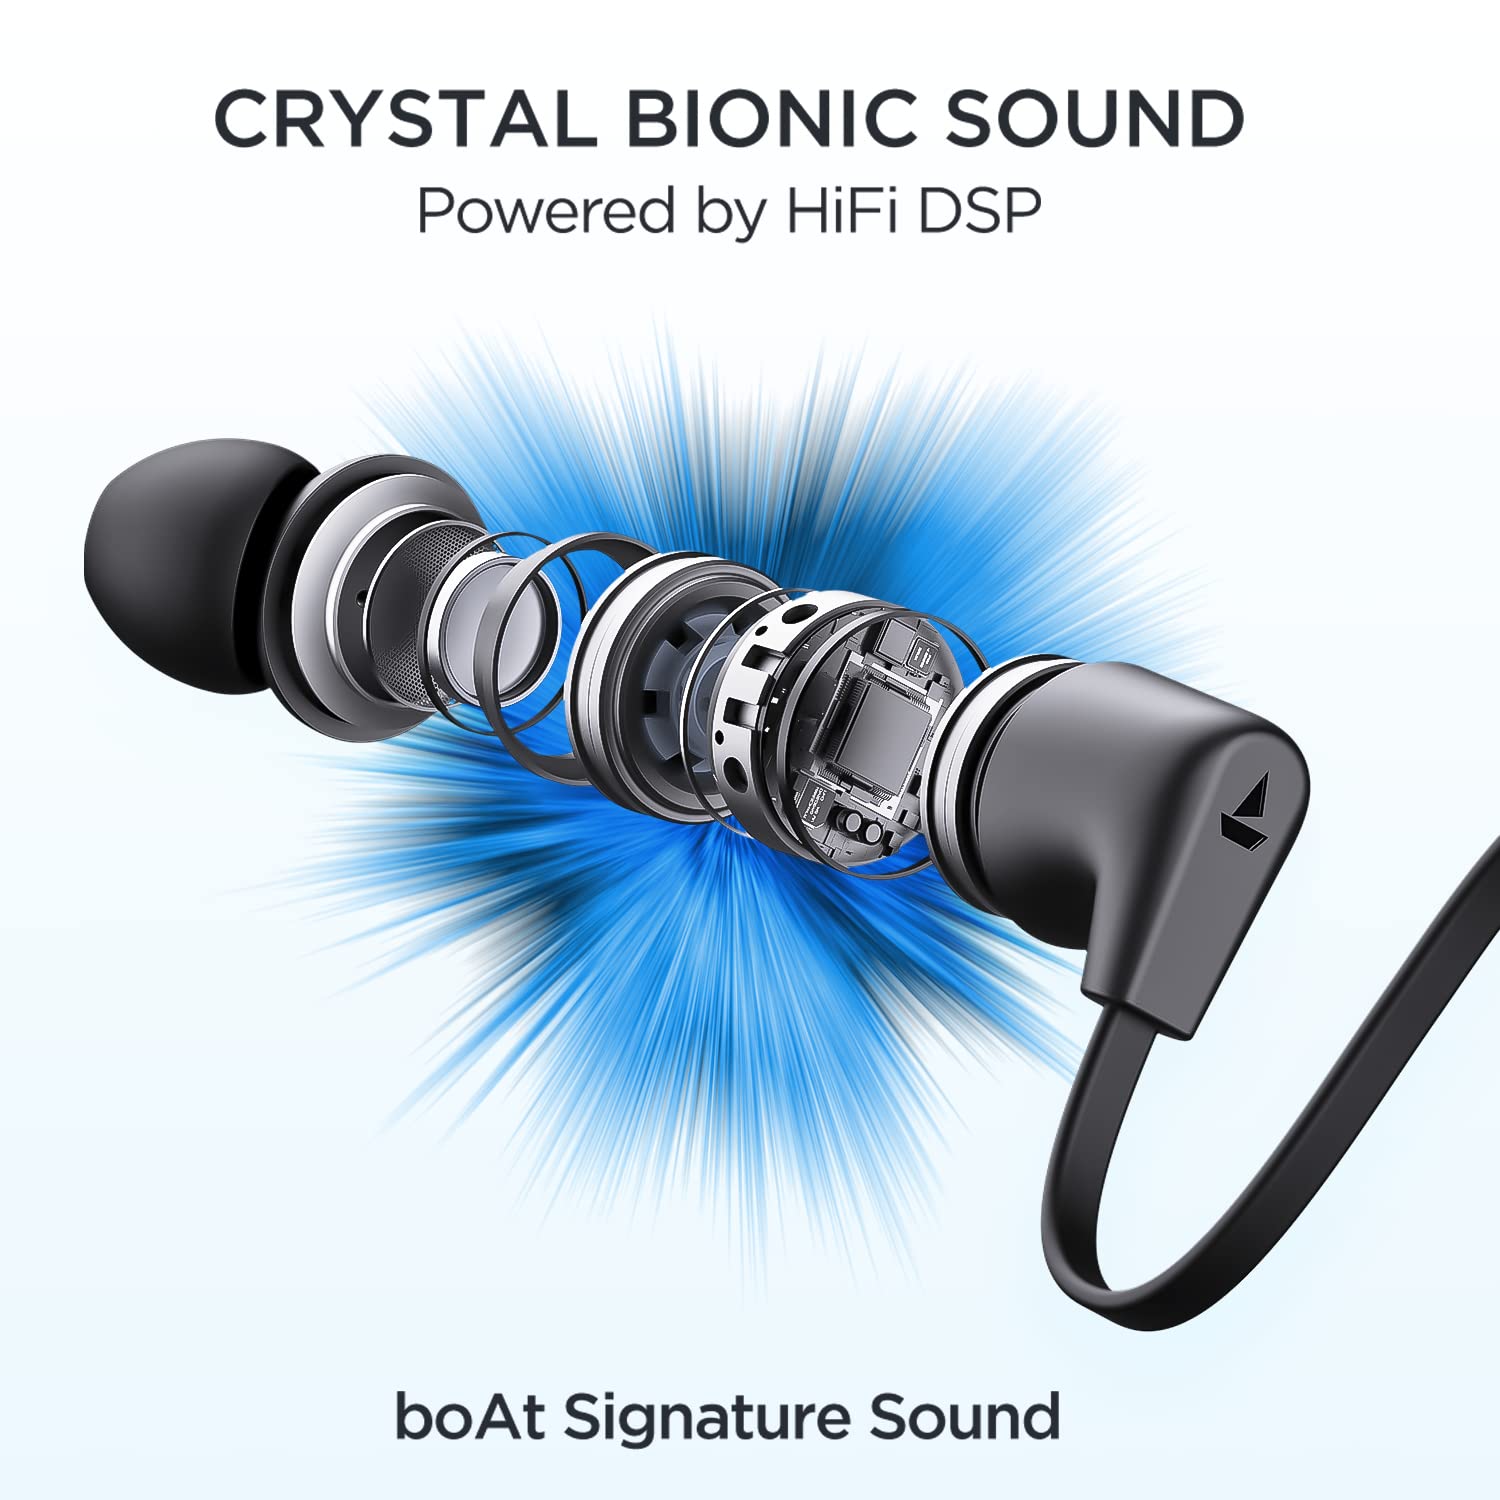 boAt Newly Launched Rockerz Trinity in Ear Earphones with 150H Playtime, Crystal Bionic Sound Powered by HiFi, Signature Sound, Beast™ Mode, ENx™ Tech, ASAP™ Charge, IPX5, Dual Pairing(Kutch White)